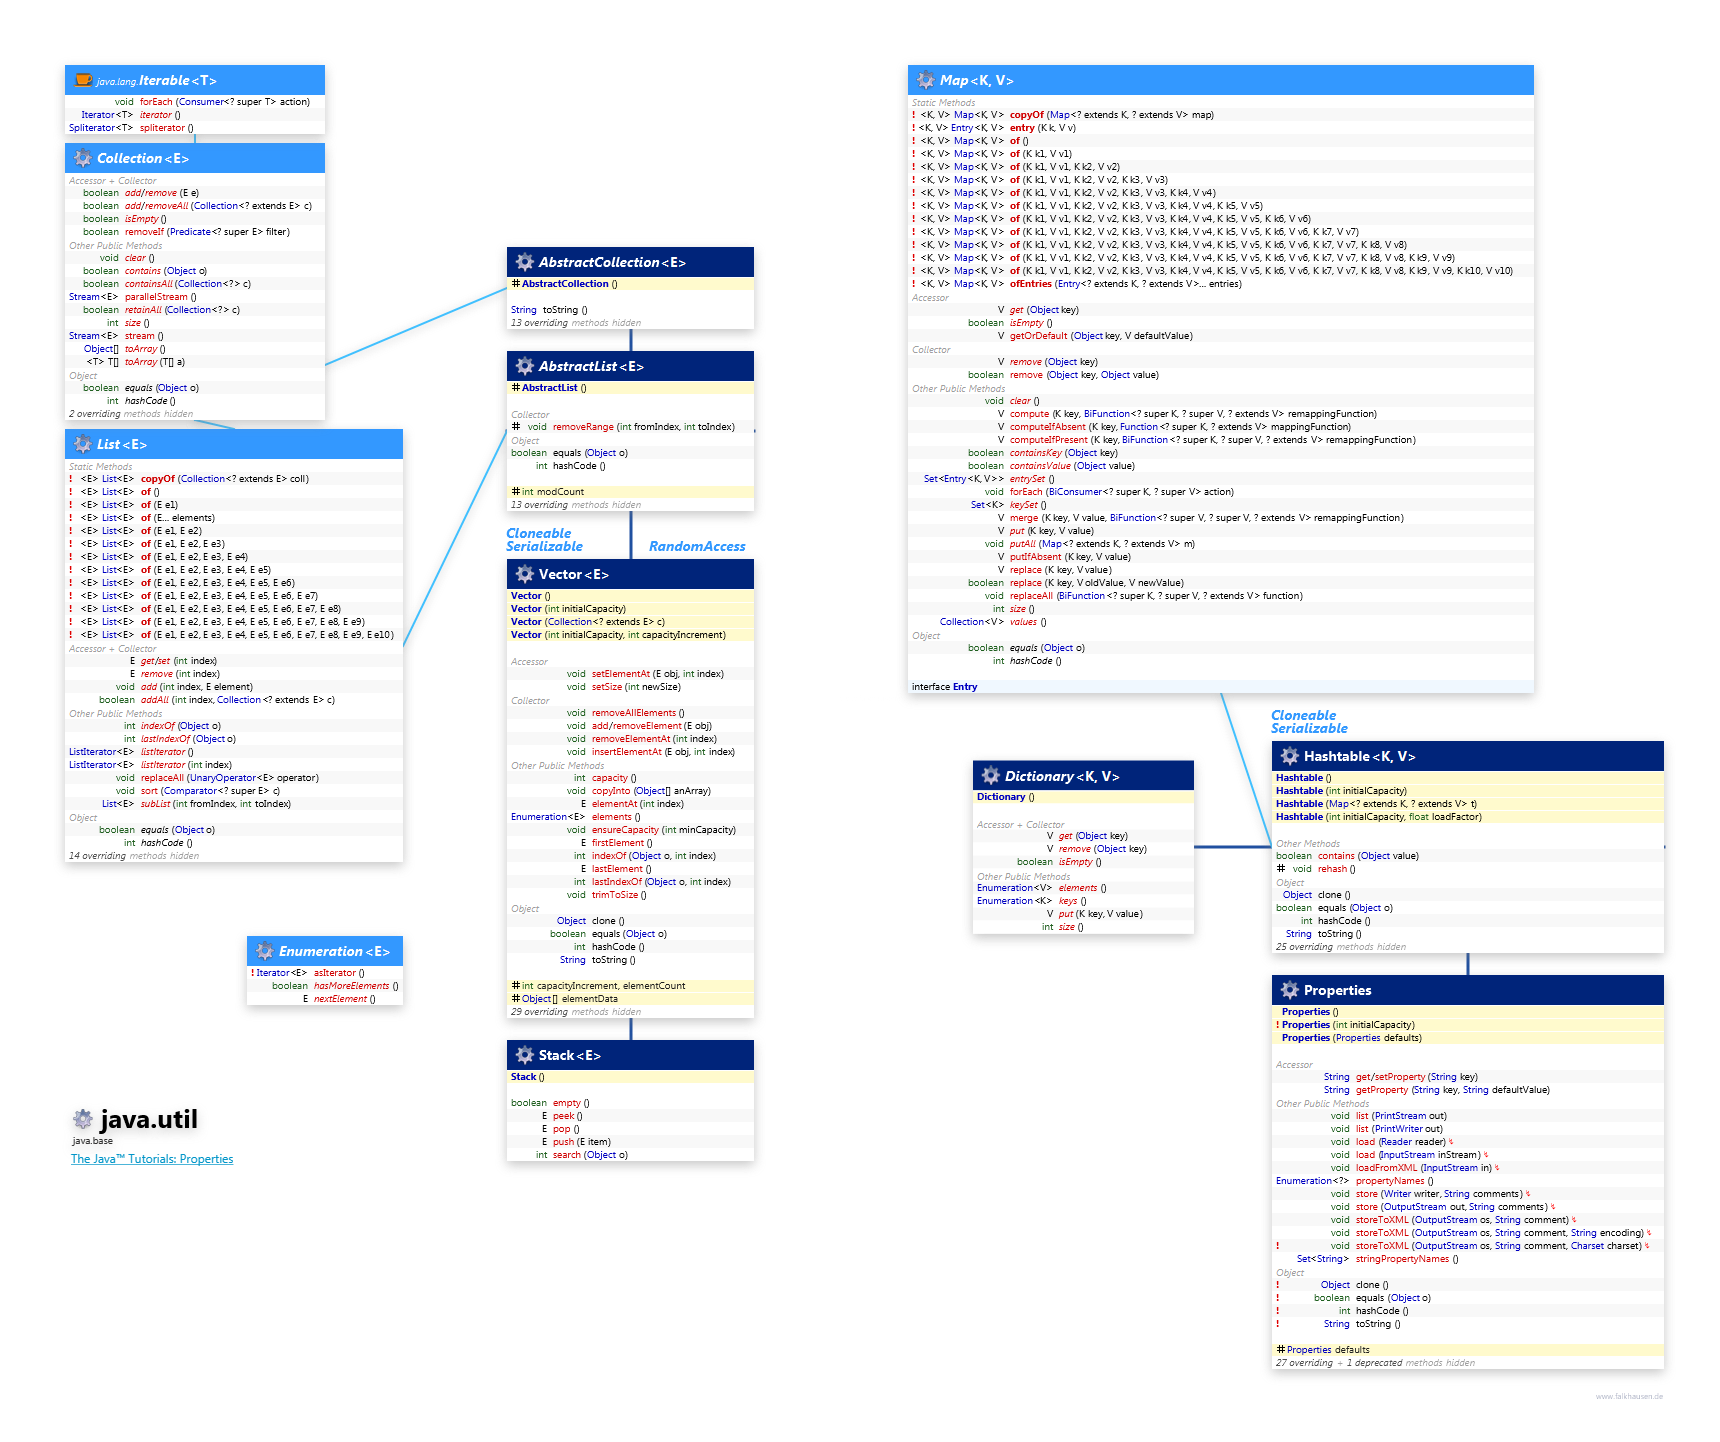 java.util Legacy Collections class diagram and api documentation for Java 10